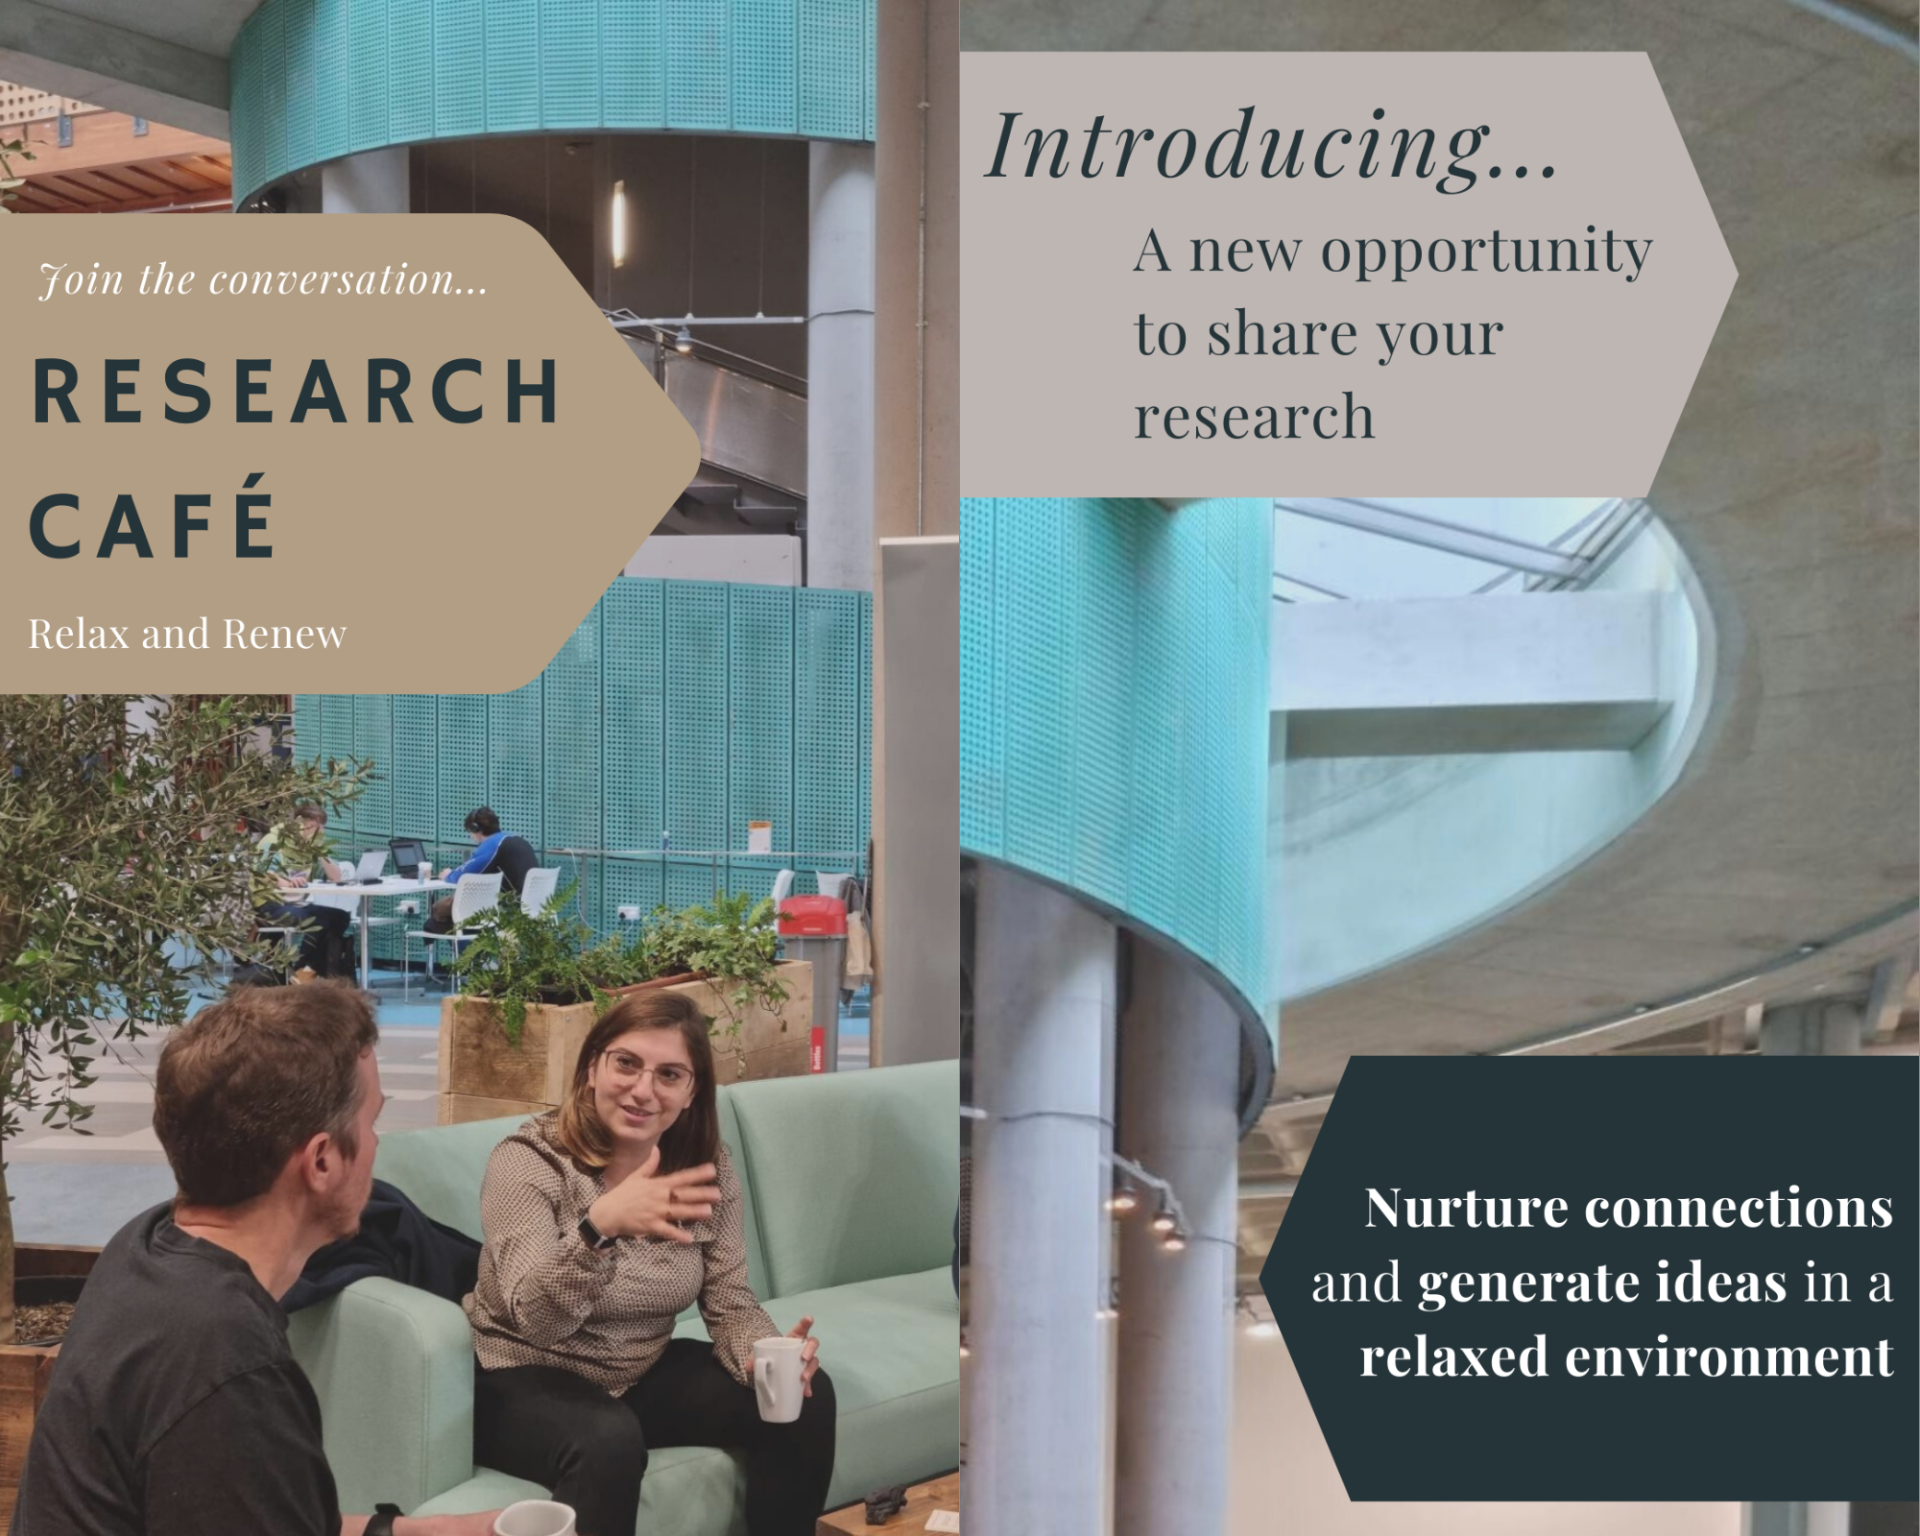 Image of two people sitting and talking. Image contains three arrow shapes that contain text: 1 Join the conversation... Research Cafe, Relax and Renew; 2 Introducing... a new opportunity to share your research, 3 Nurture connections and generate ideas in a relaxed environment.